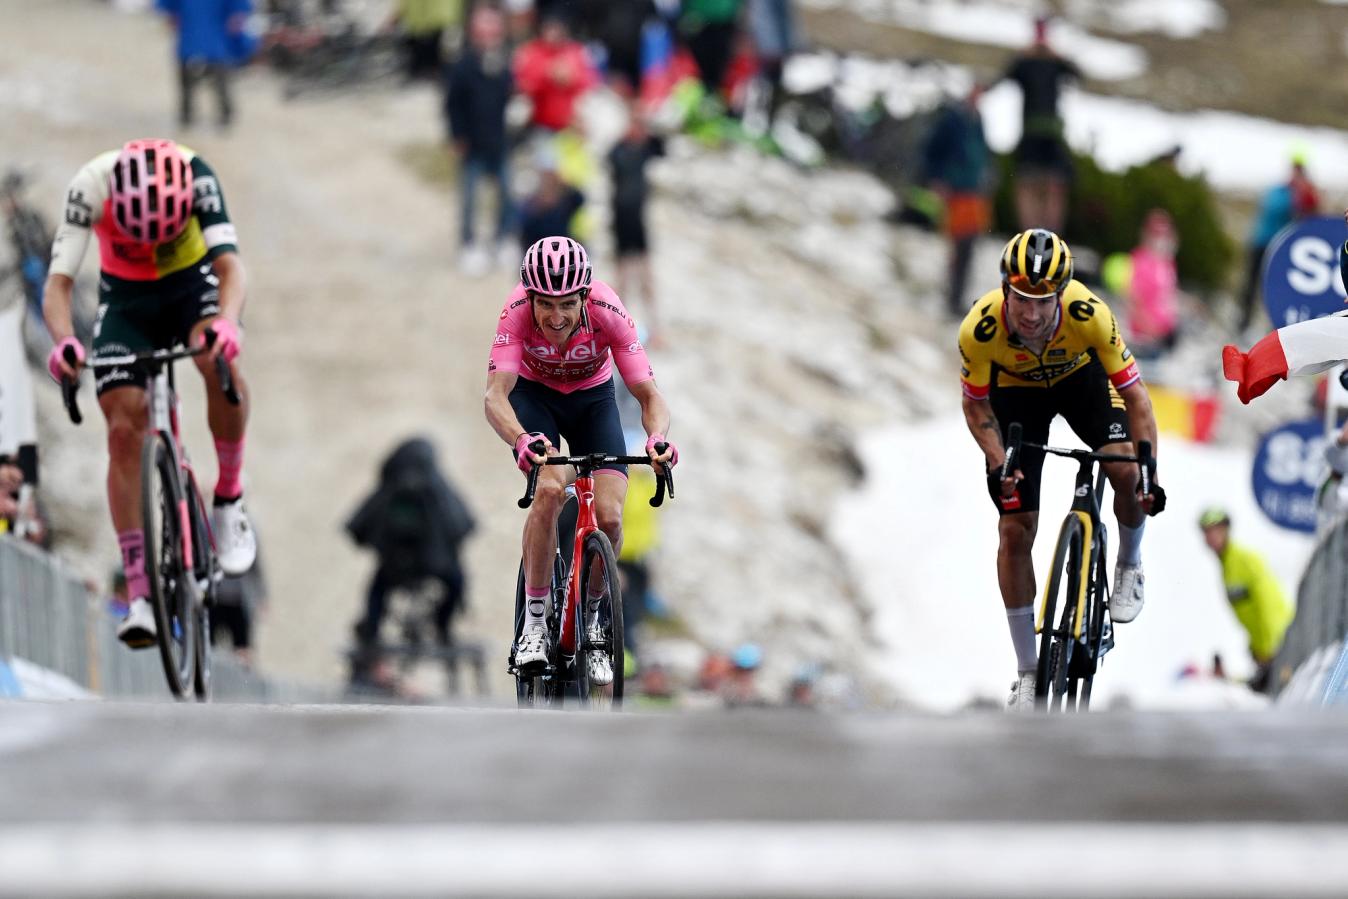 The biggest Giro battles come in the mountains